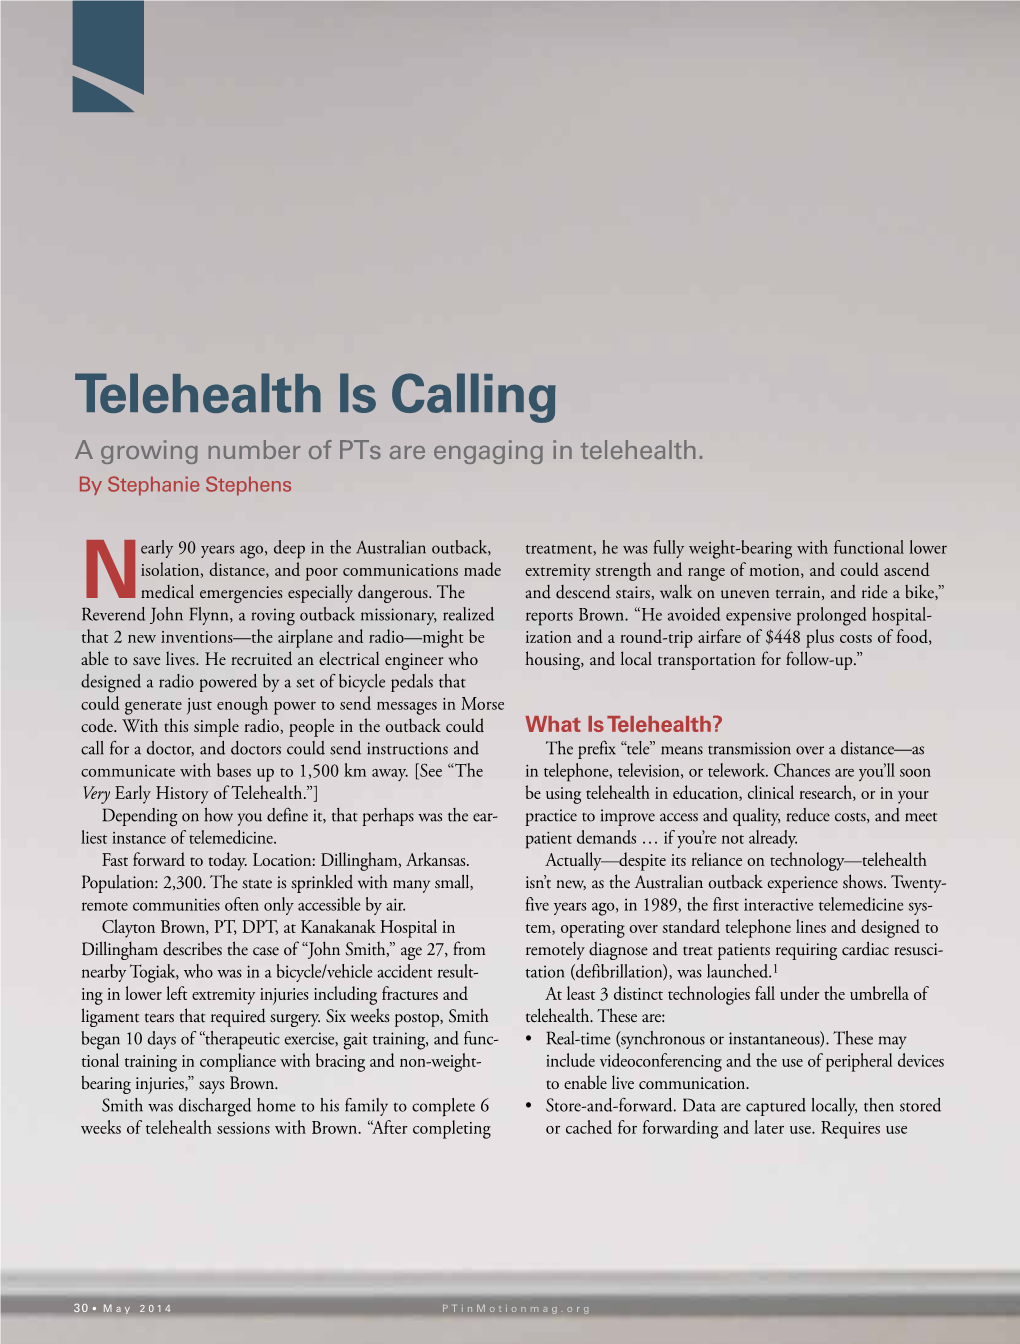 Telehealth Is Calling a Growing Number of Pts Are Engaging in Telehealth